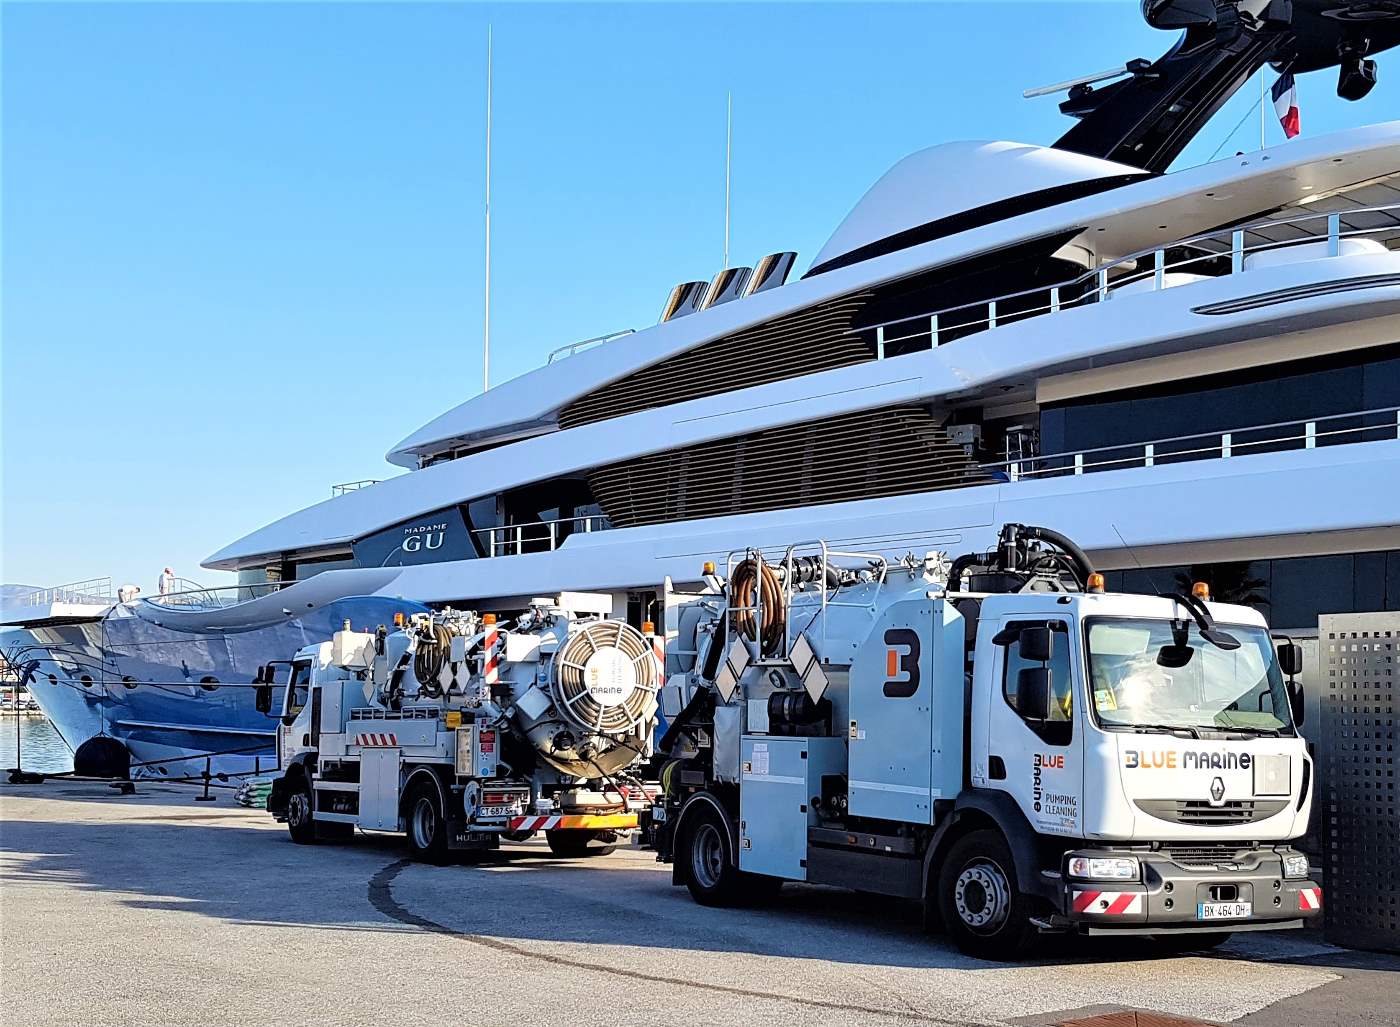 Tank emptying service for yachts in Mallorca